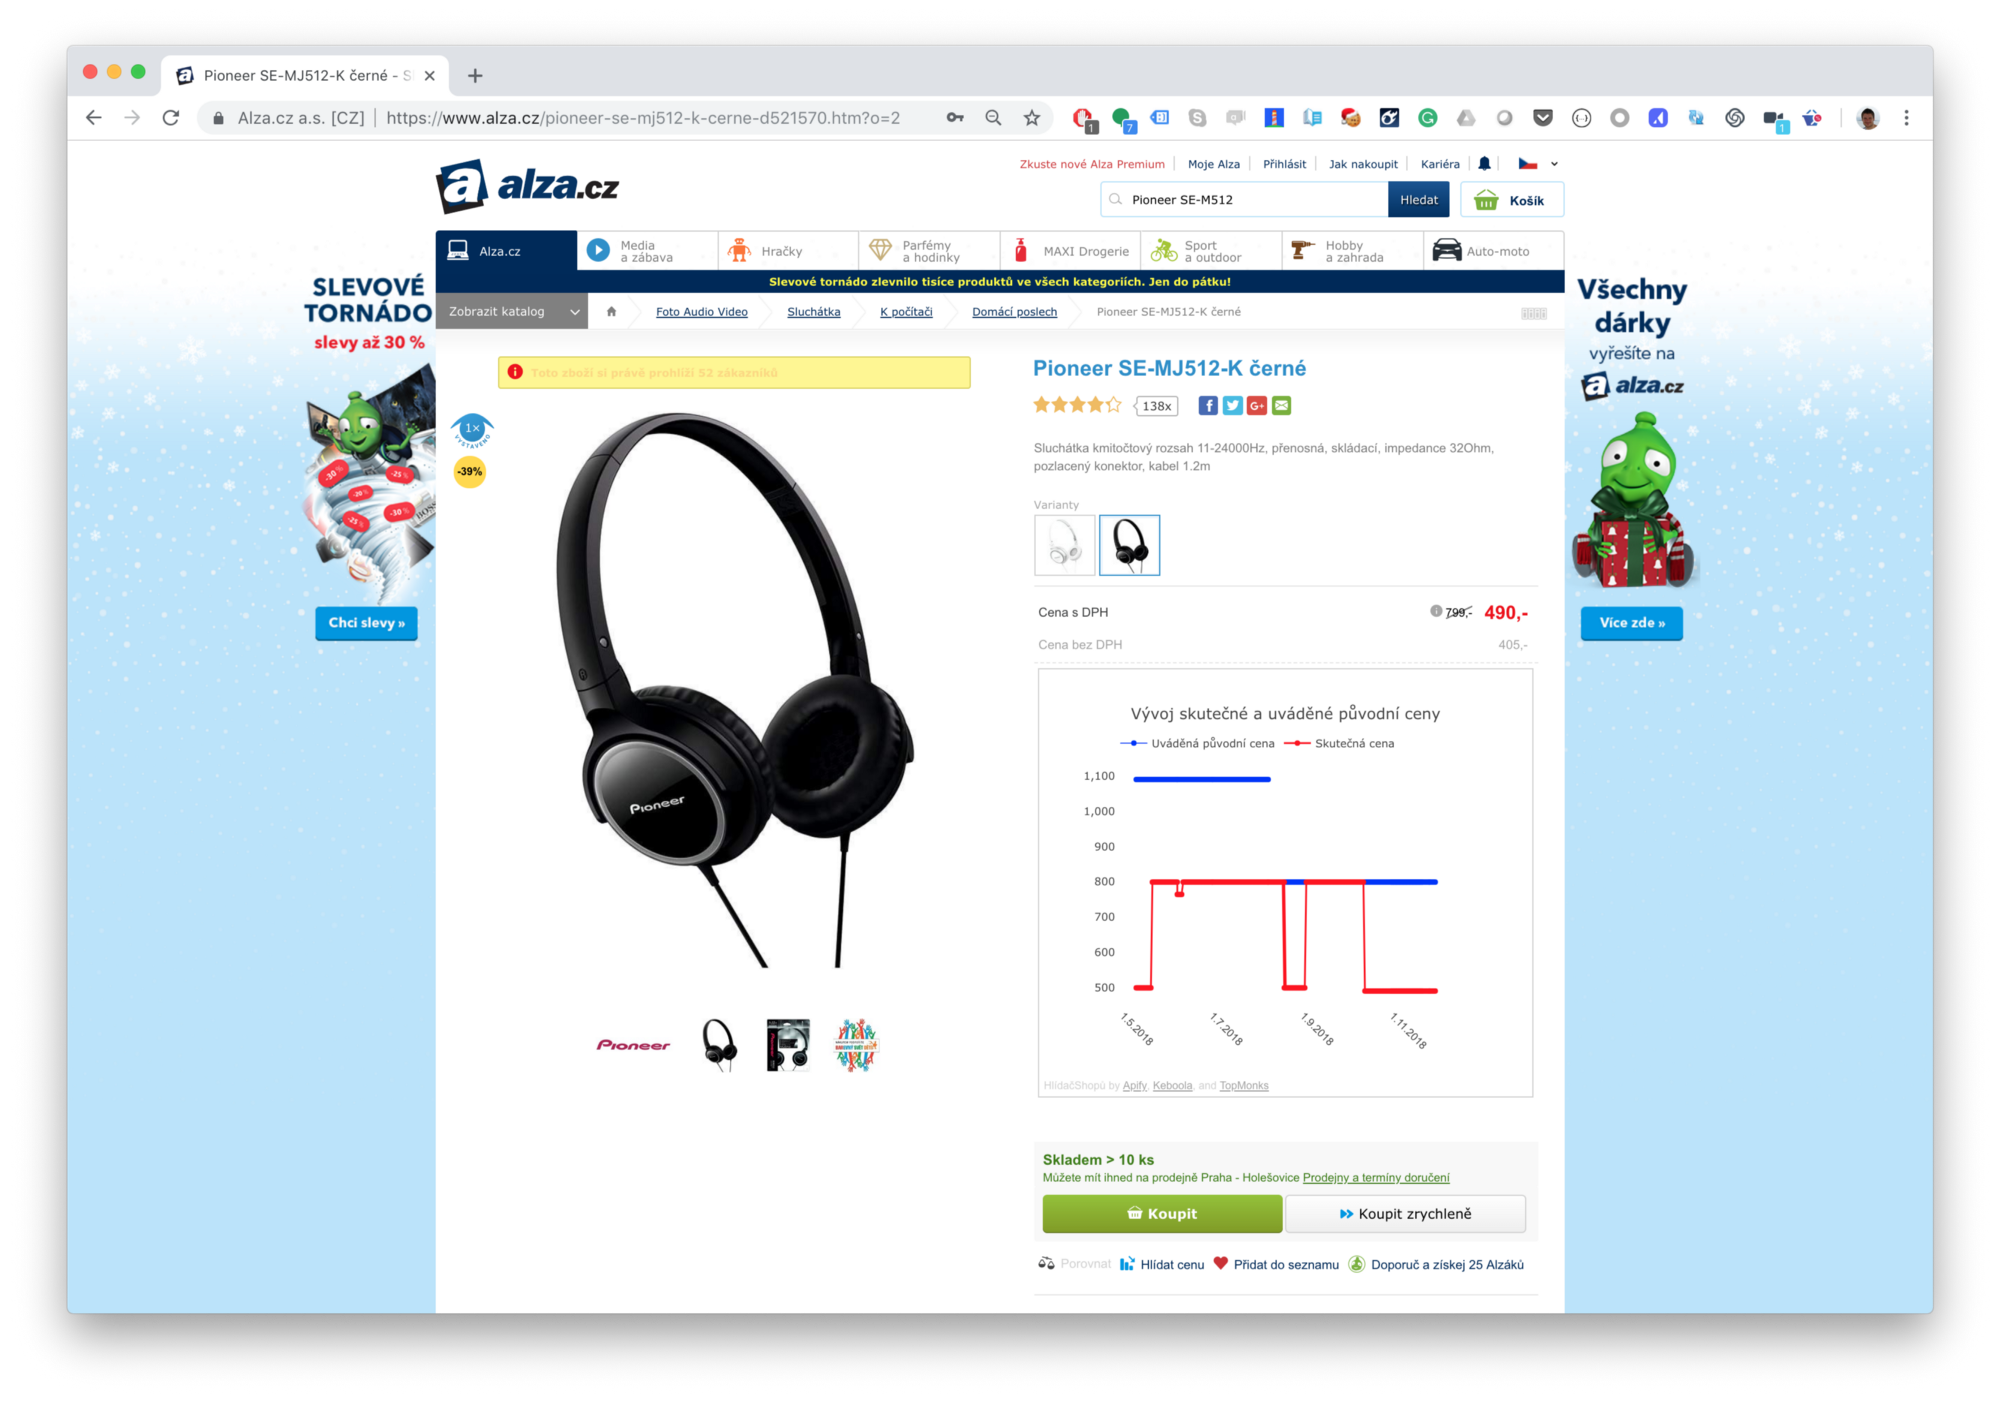 screenshot of headphones on sale at alza.cz from 799 CZK to 490 CZK